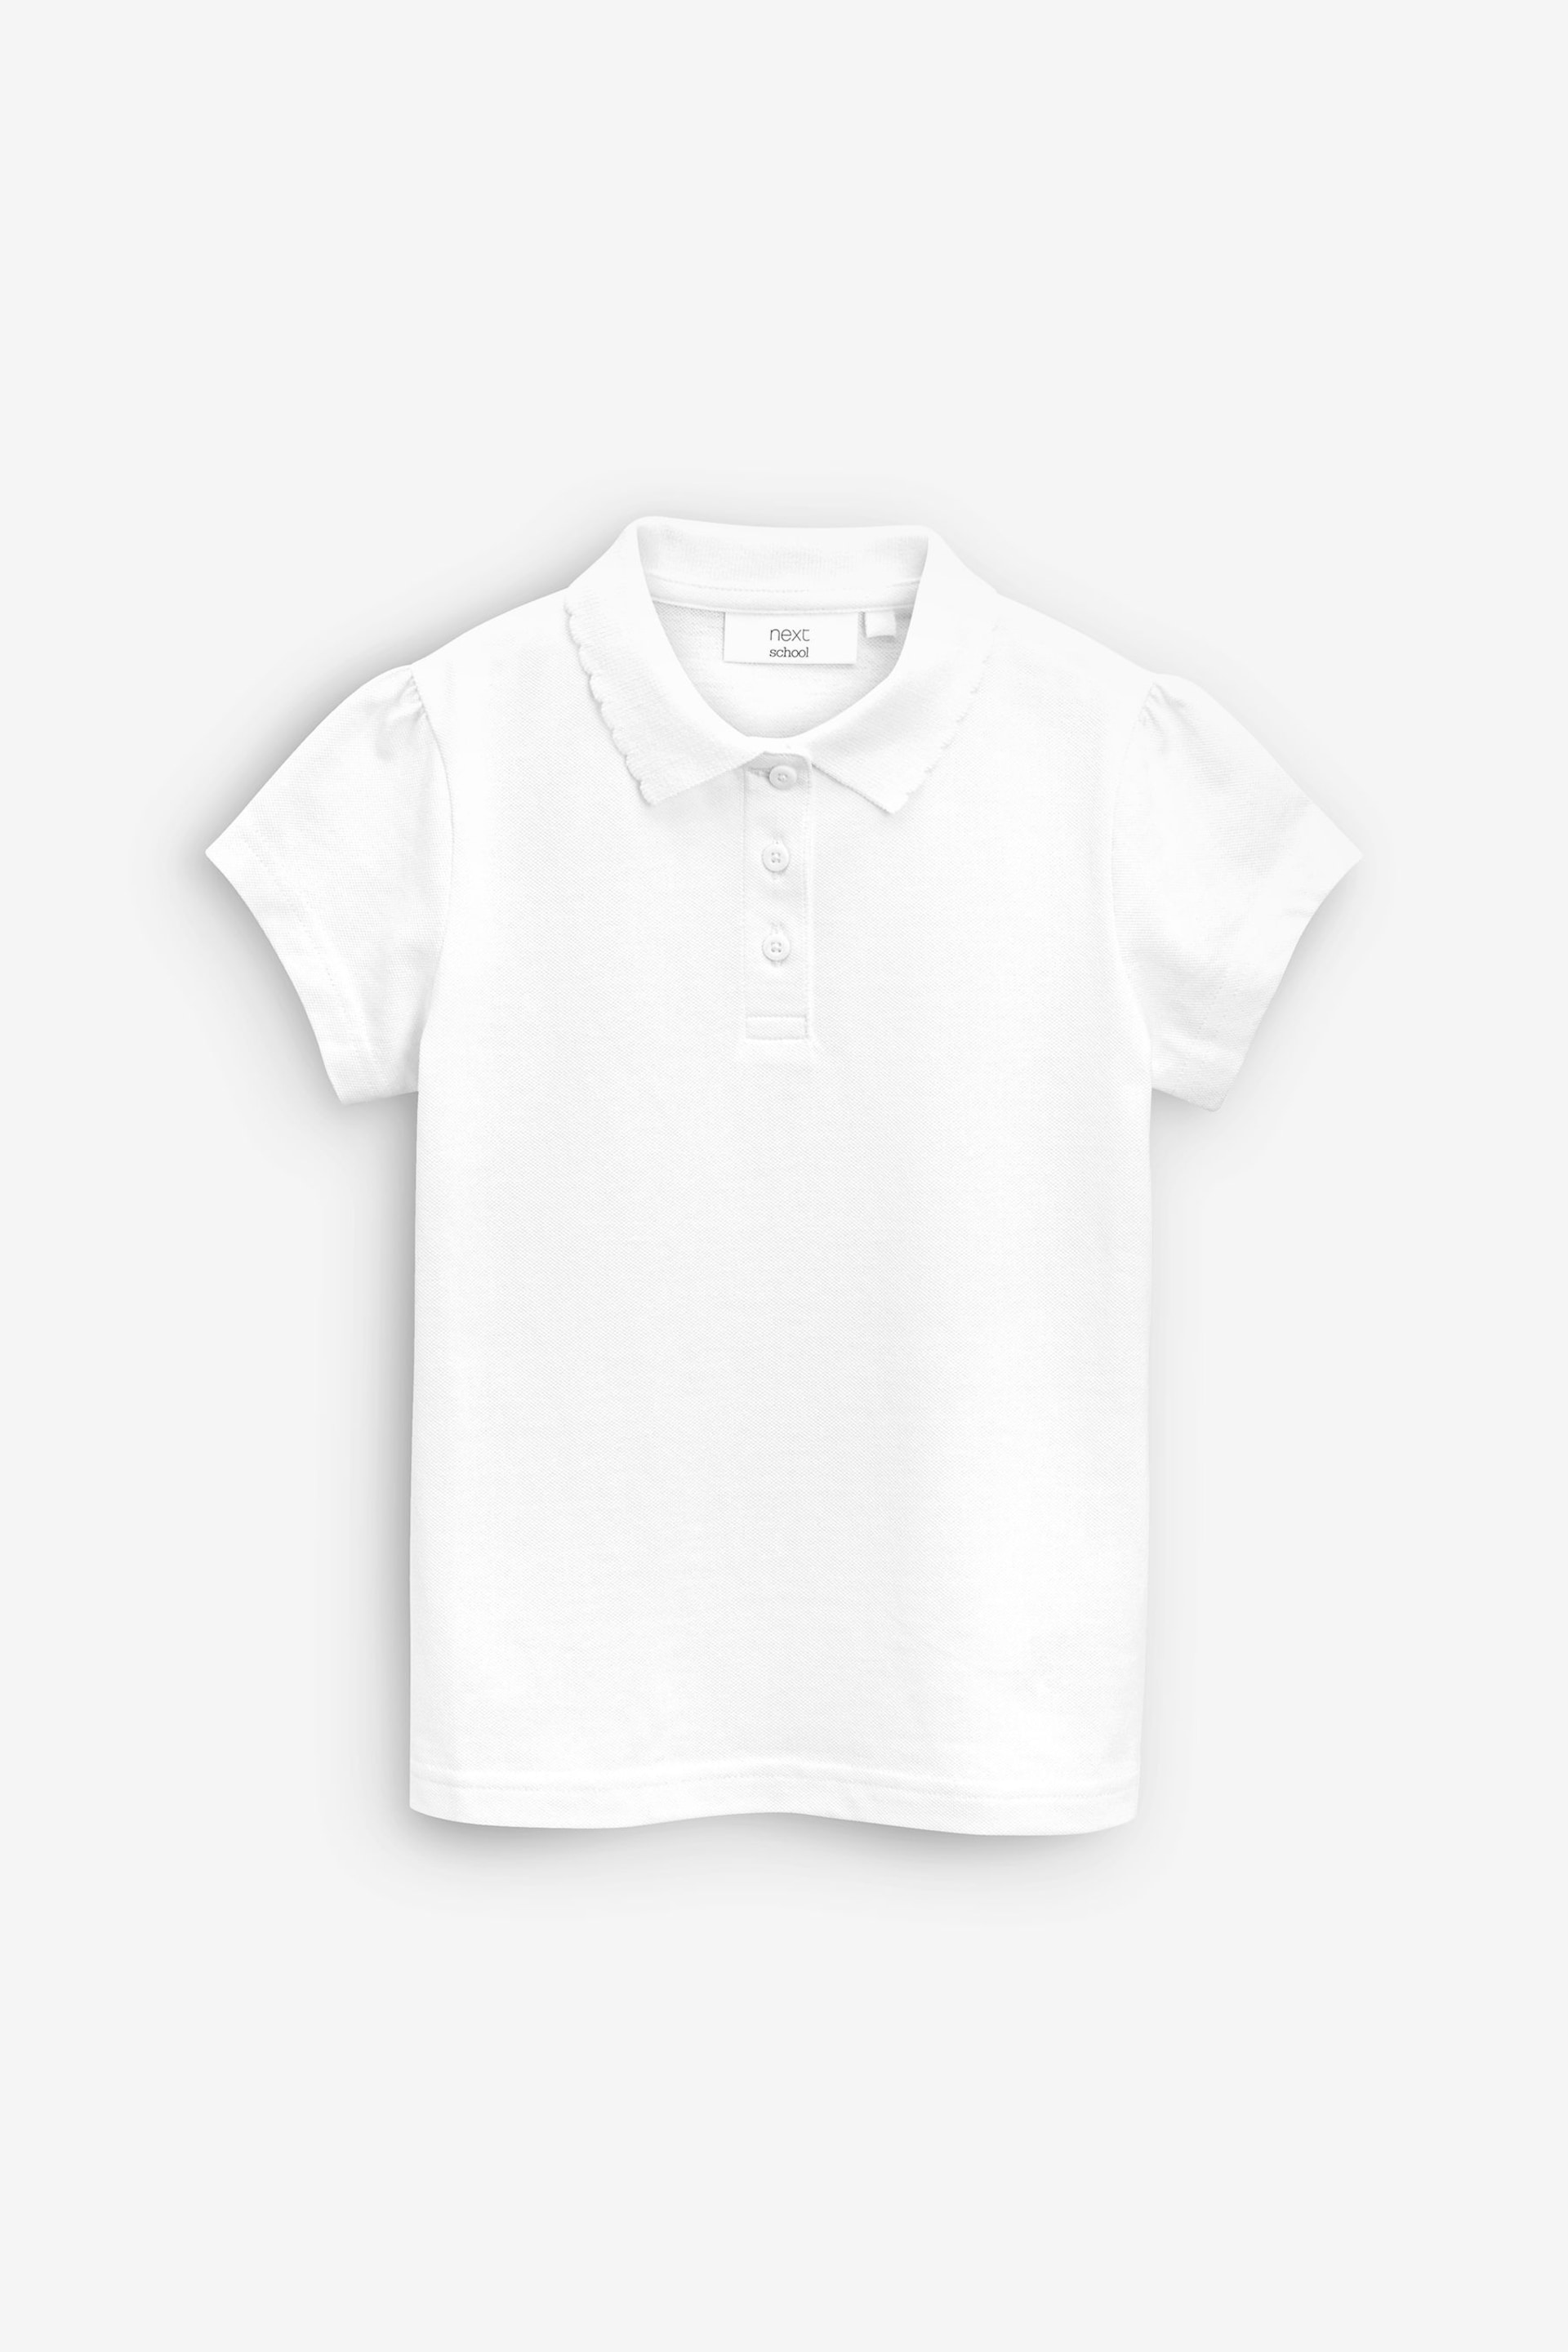 White Regular Fit Cotton Short Sleeve Polo Shirts 2 Pack (3-16yrs) - Image 2 of 6